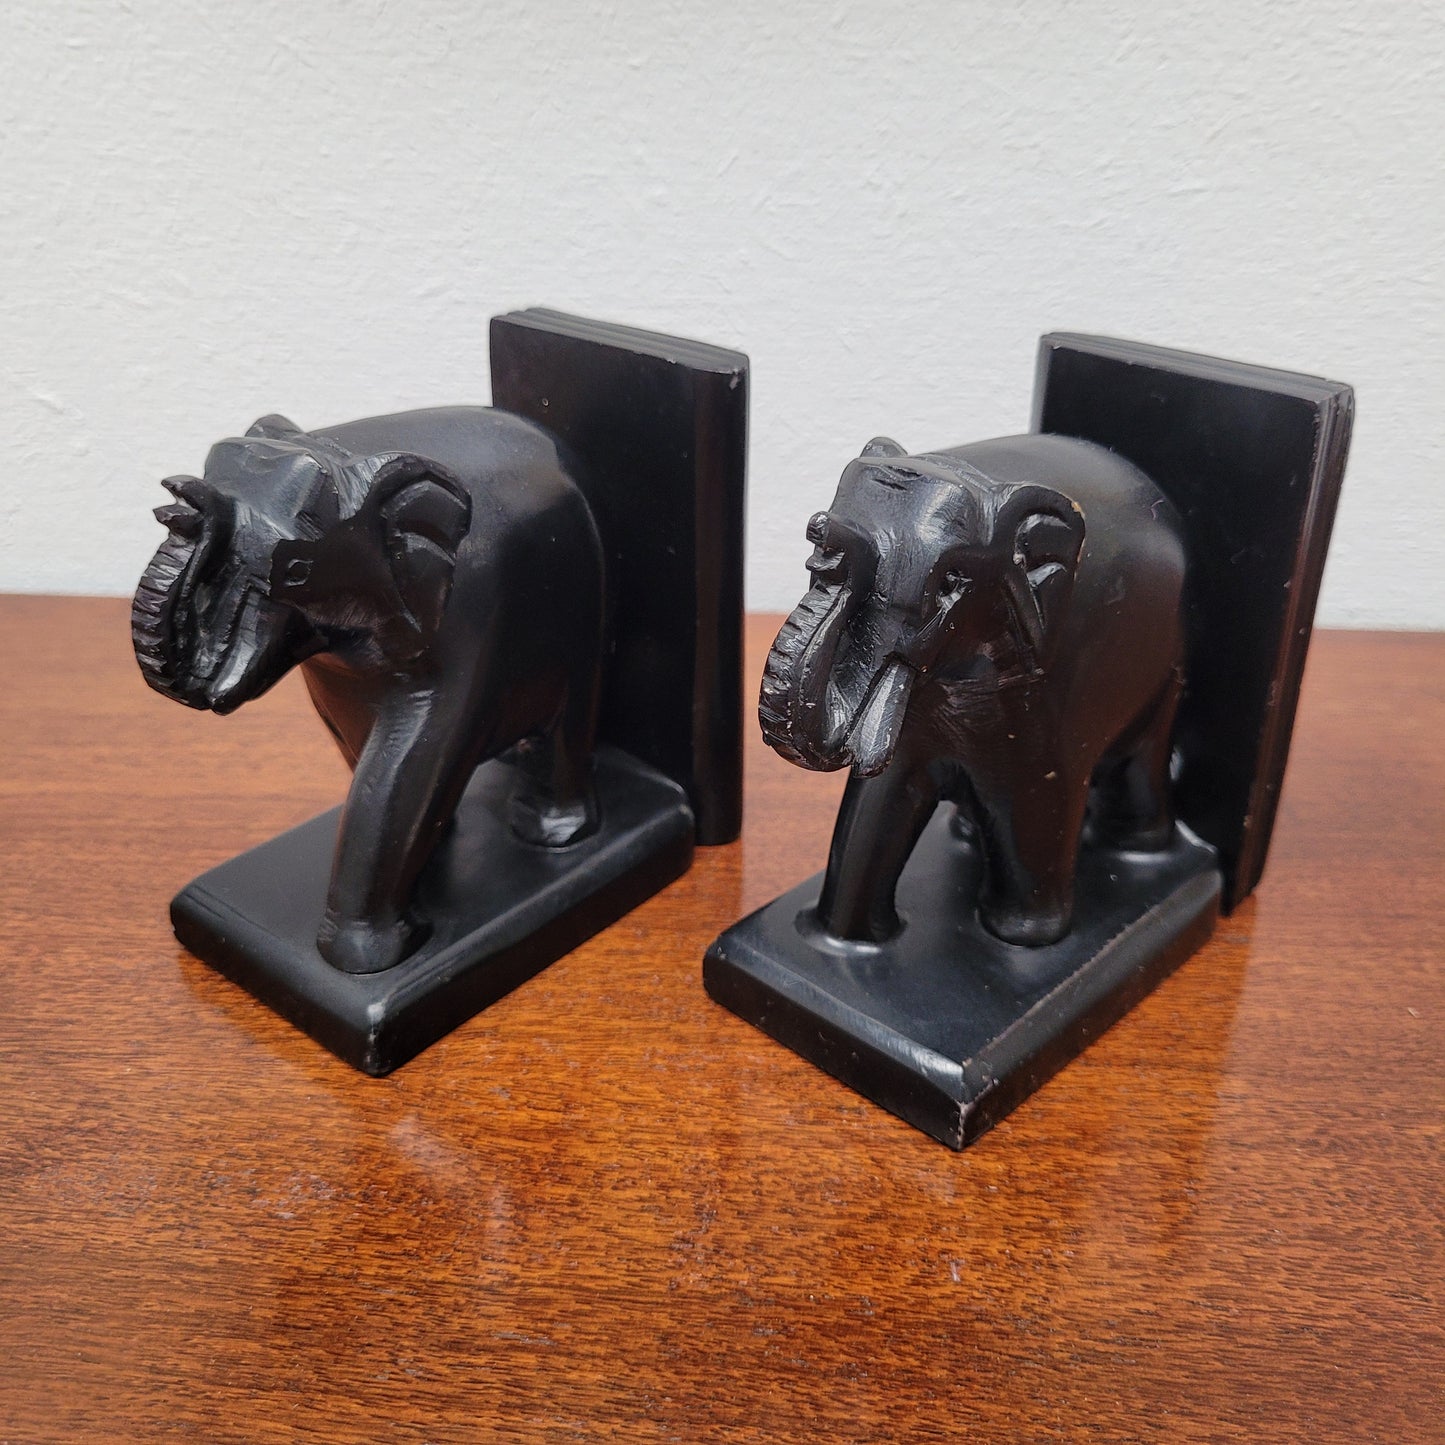 Pair of Vintage Carved Stone Elephant Bookends